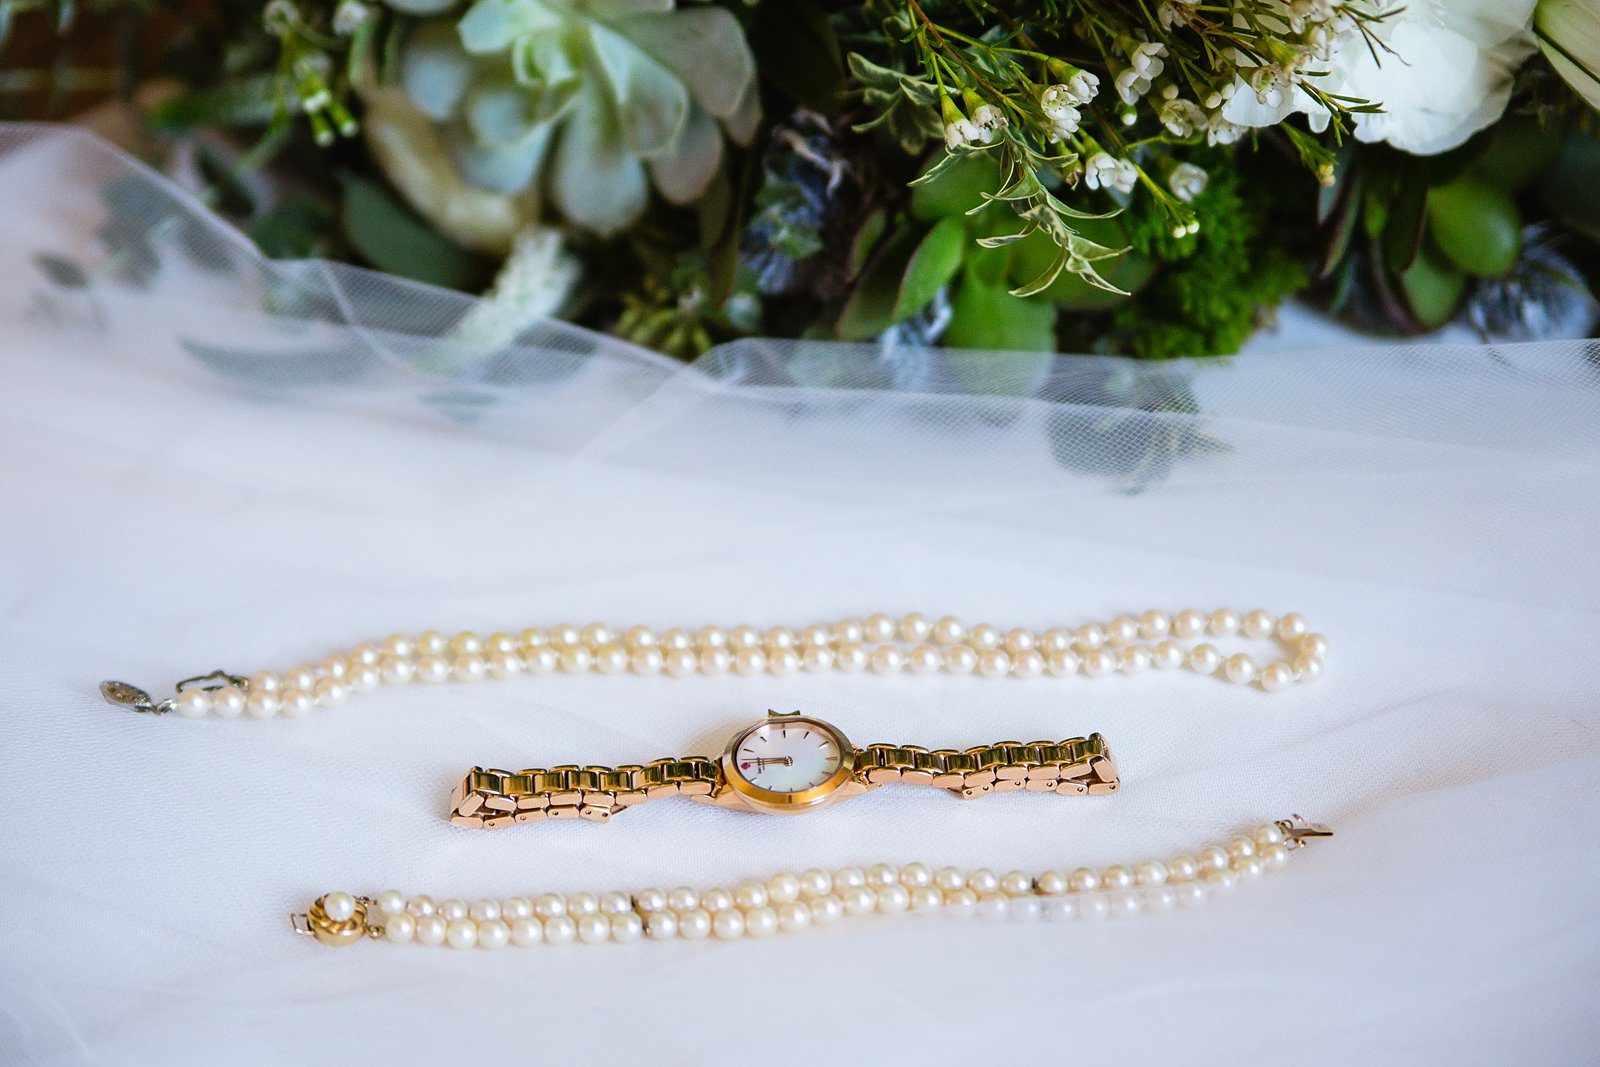 Brides's wedding day details of pearl necklace and bracelet with gold watch by PMA Photography.